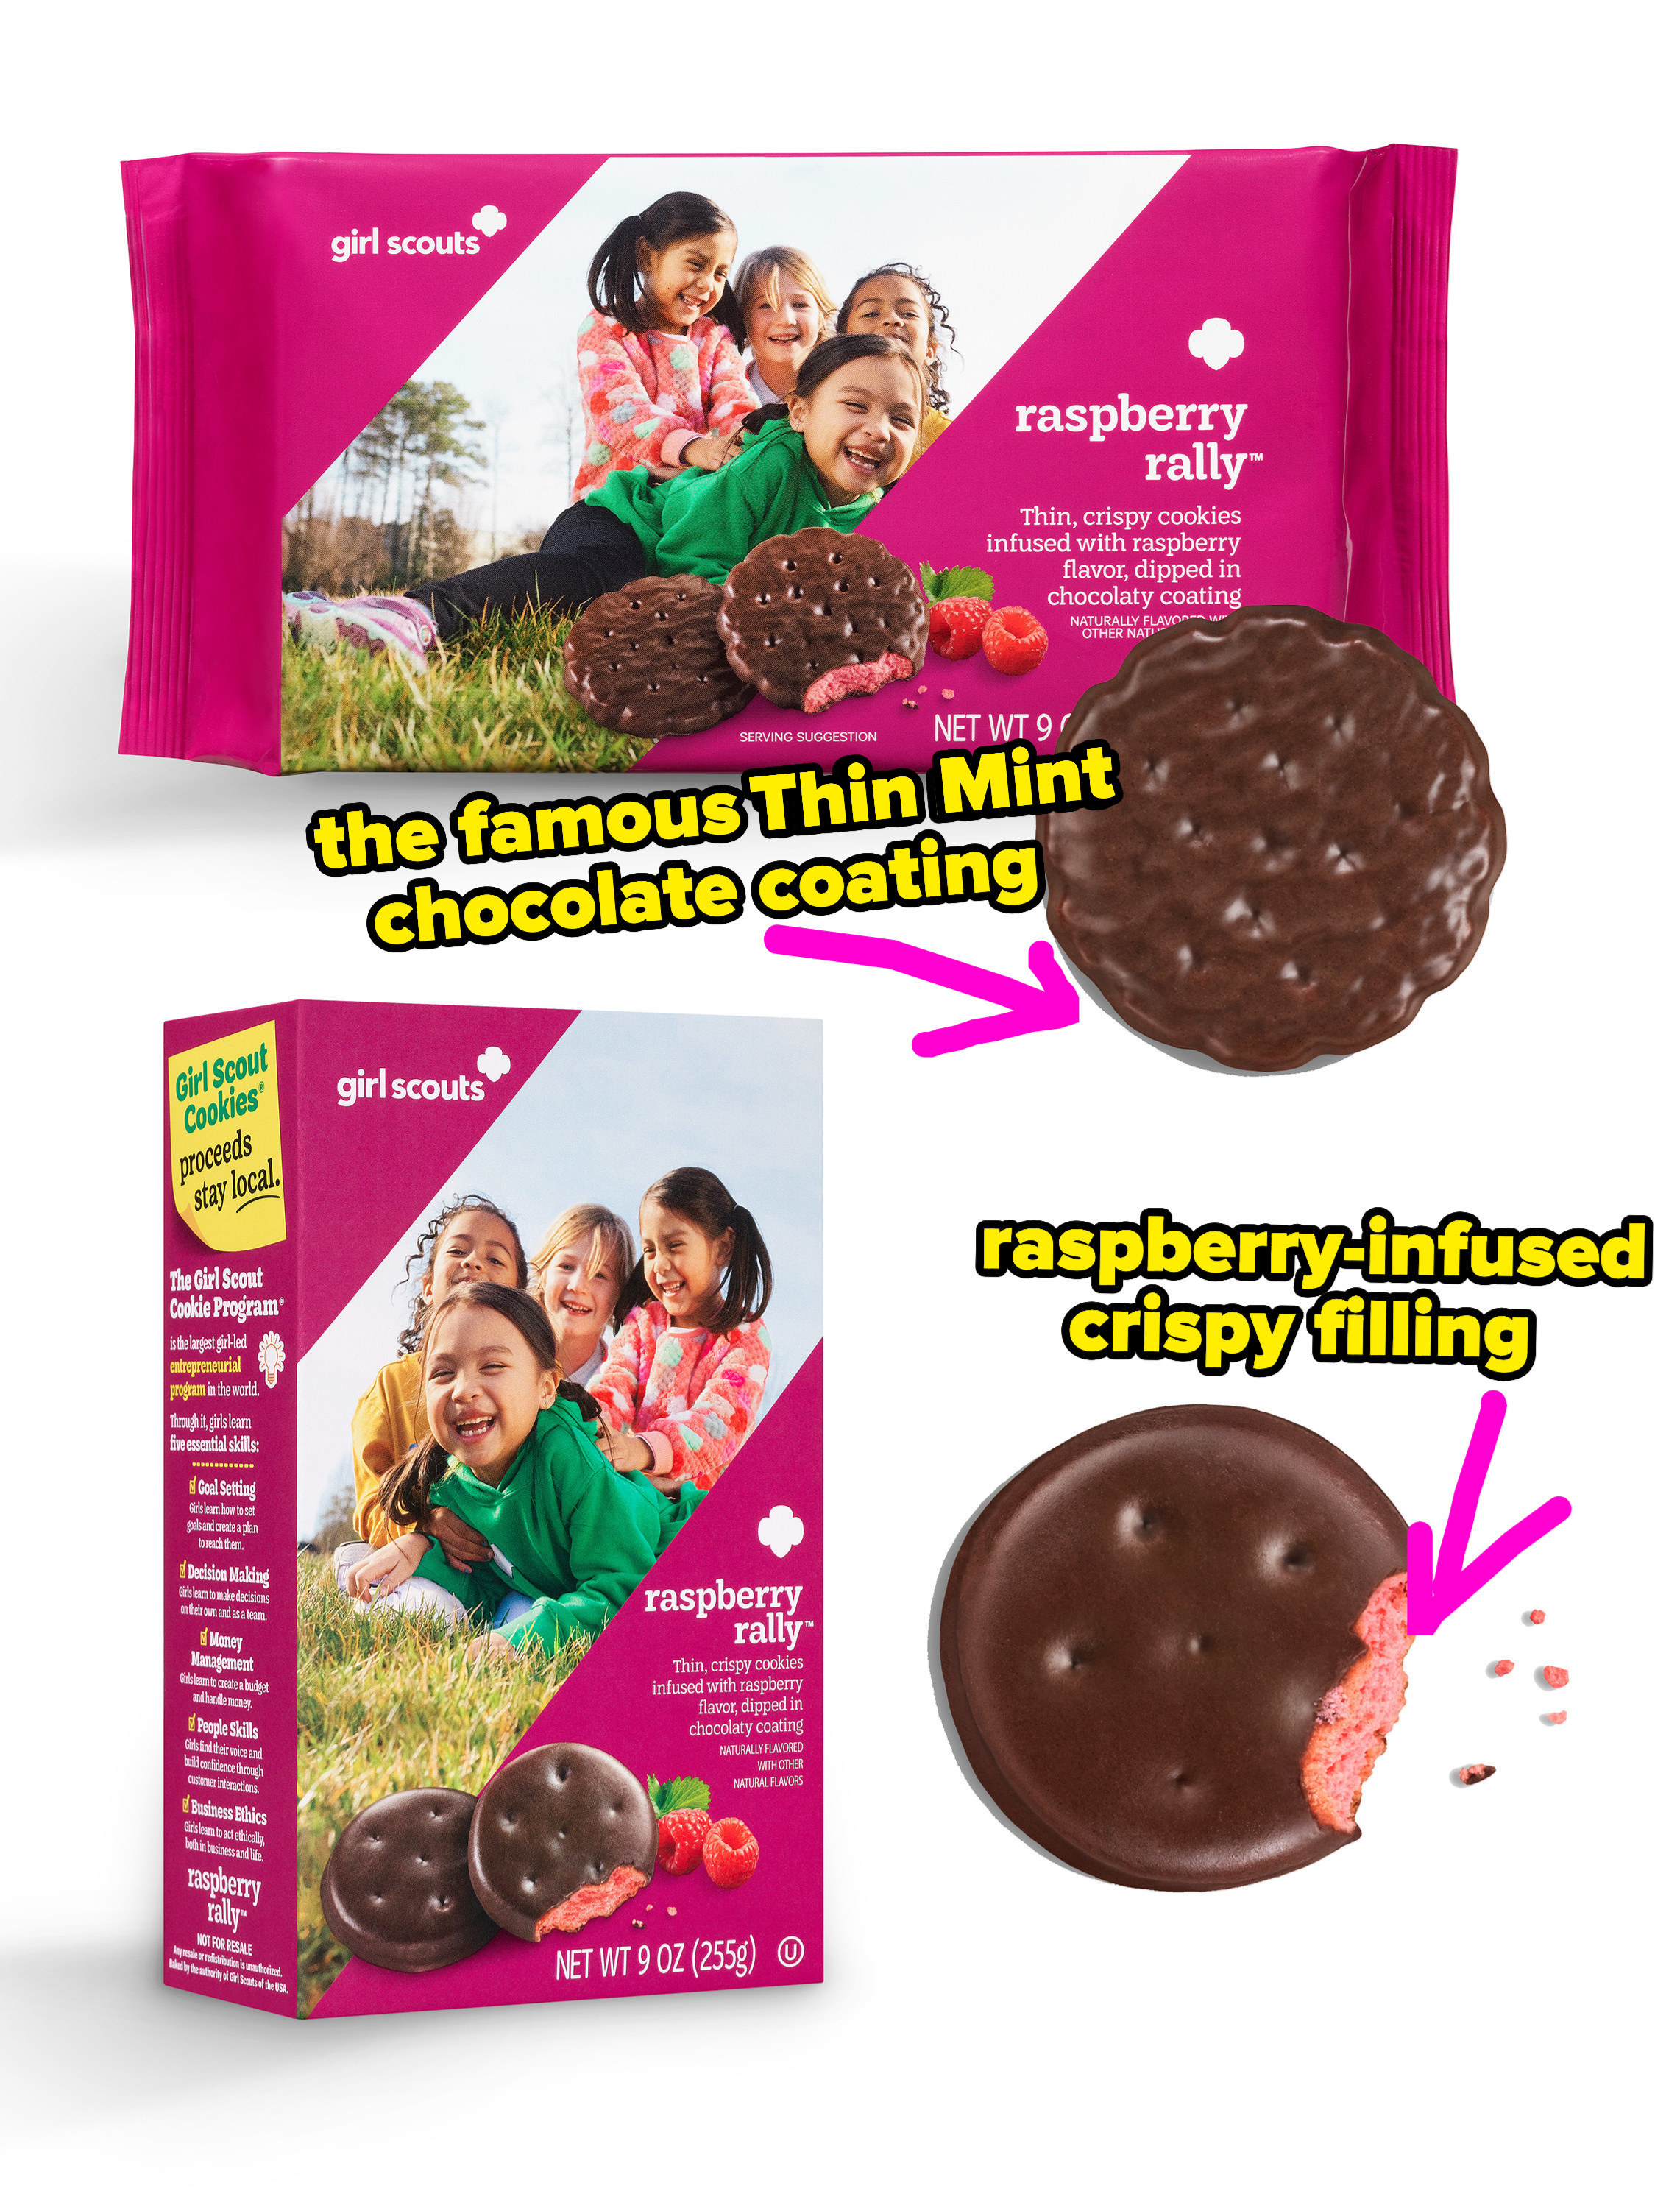 girl scout cookies packaging showing the slight differences between the two versions of the new cookie; one is smoother, while the other has more texture